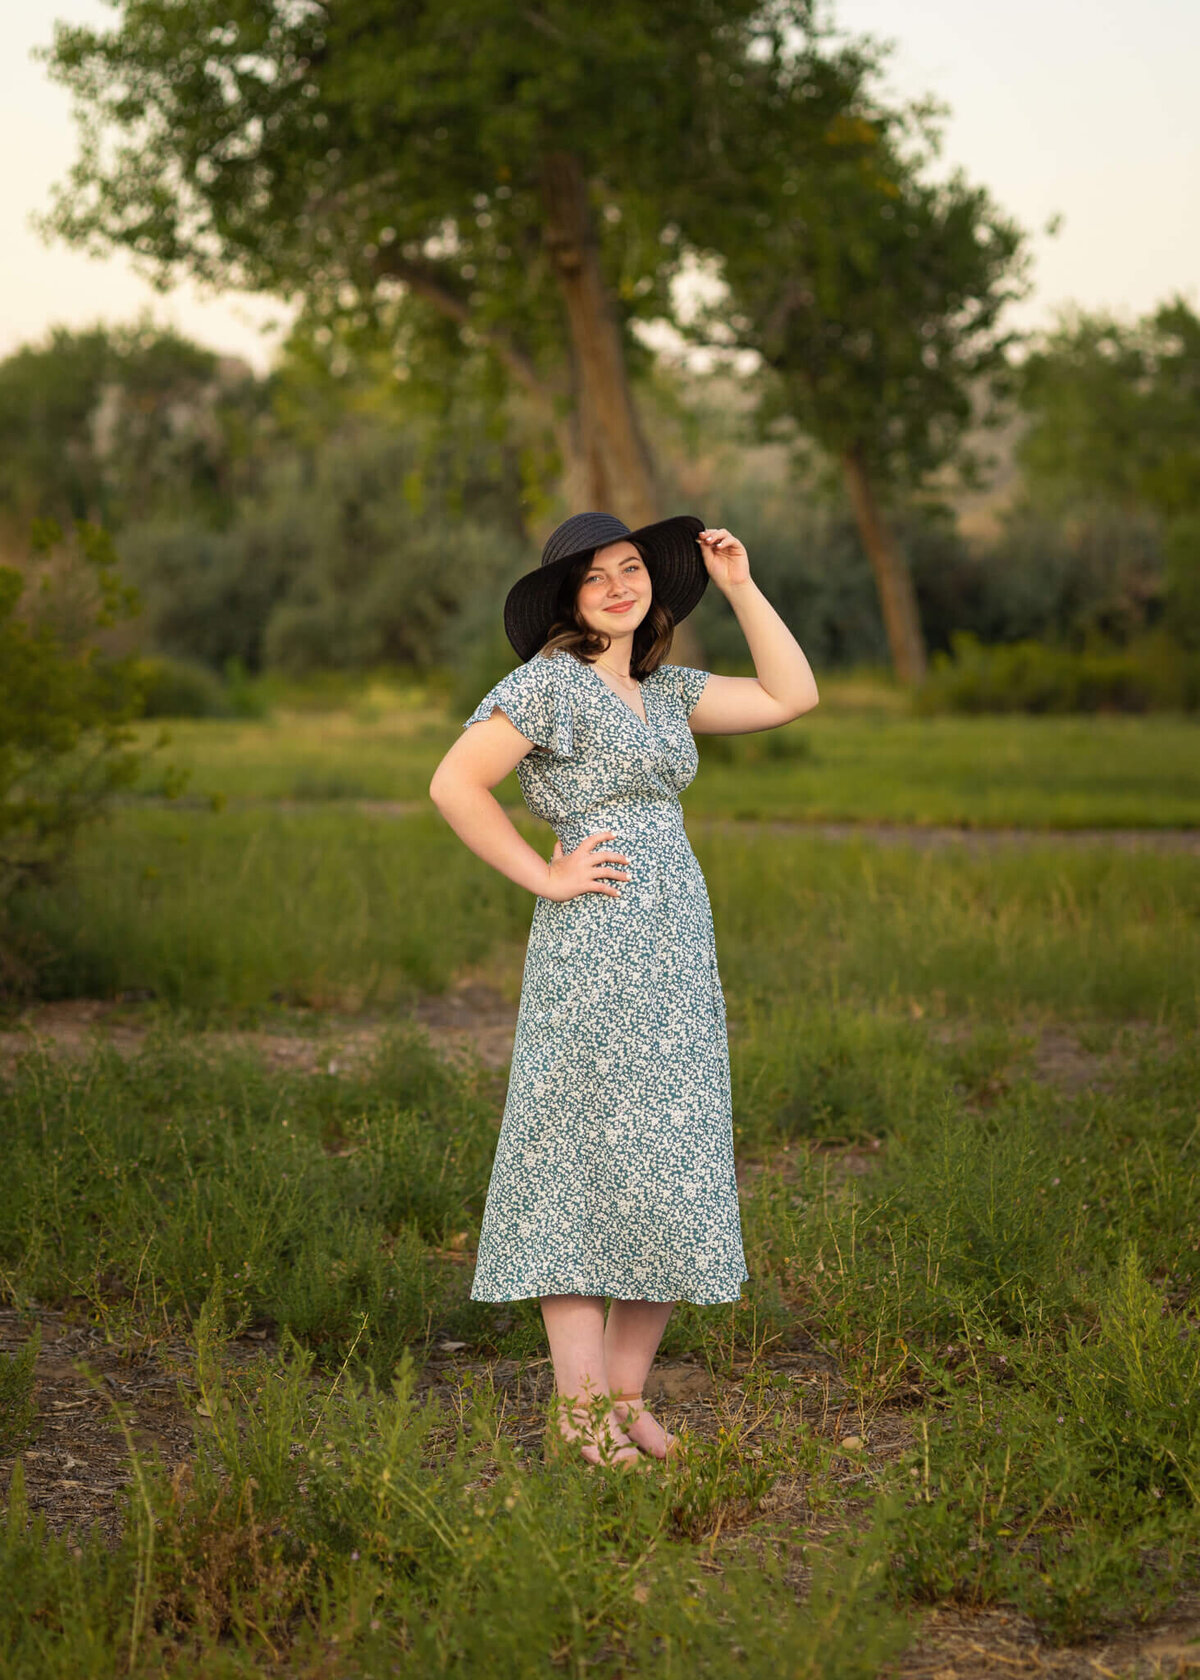 high school senior girl in green floral dress with a black floppy hat standing in a green field